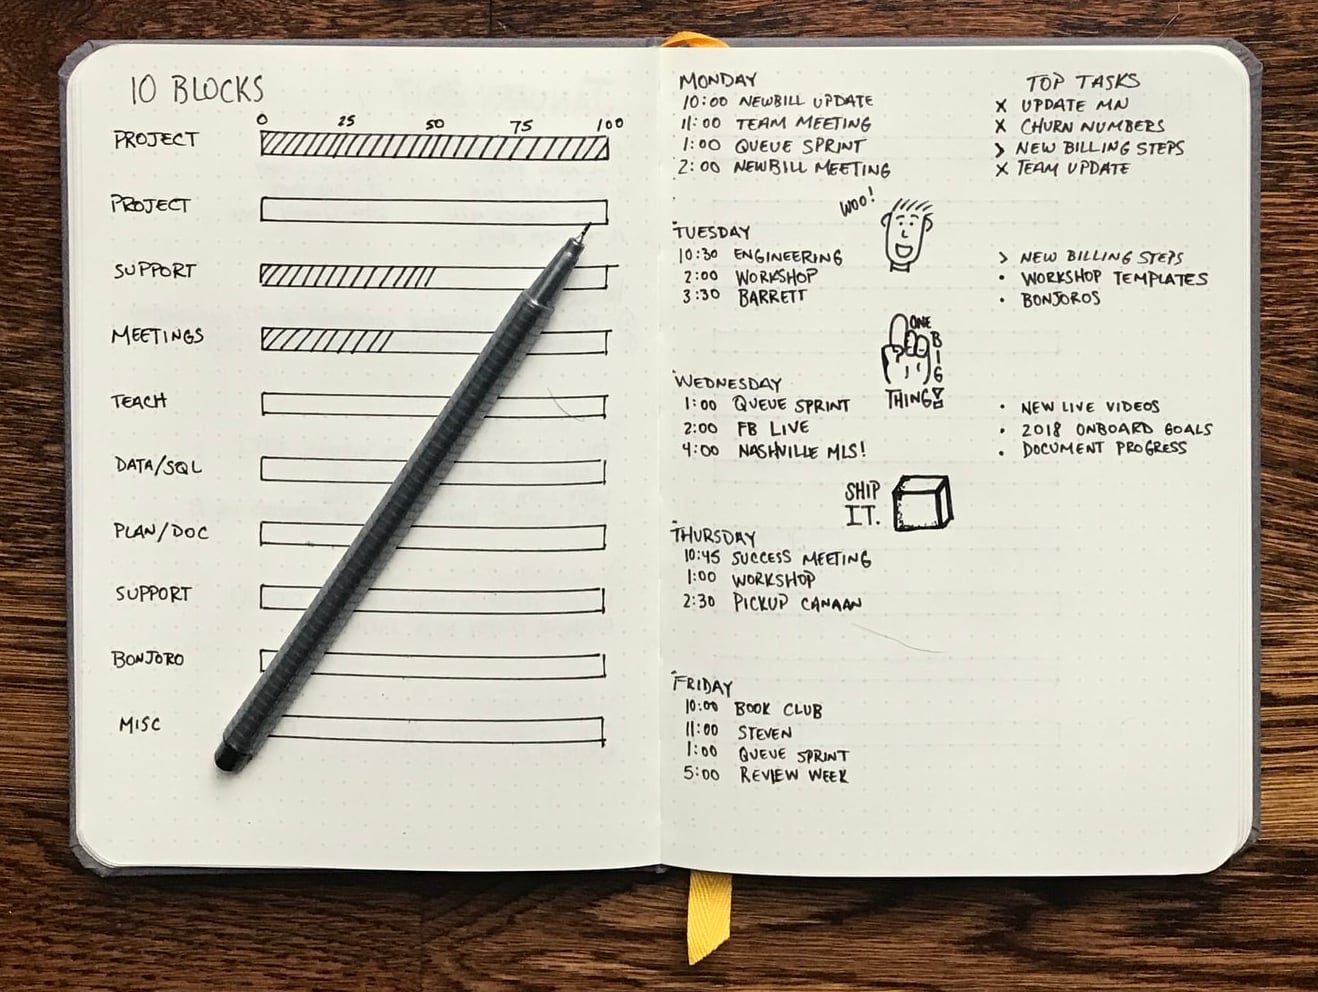 A notebook with small dots forming a grid on each page. On the left page, a series of progress bars have been drawn in to track project status. The right page contains appointments and tasks for the work week. The right page is broken up with a few hand-drawn doodles.